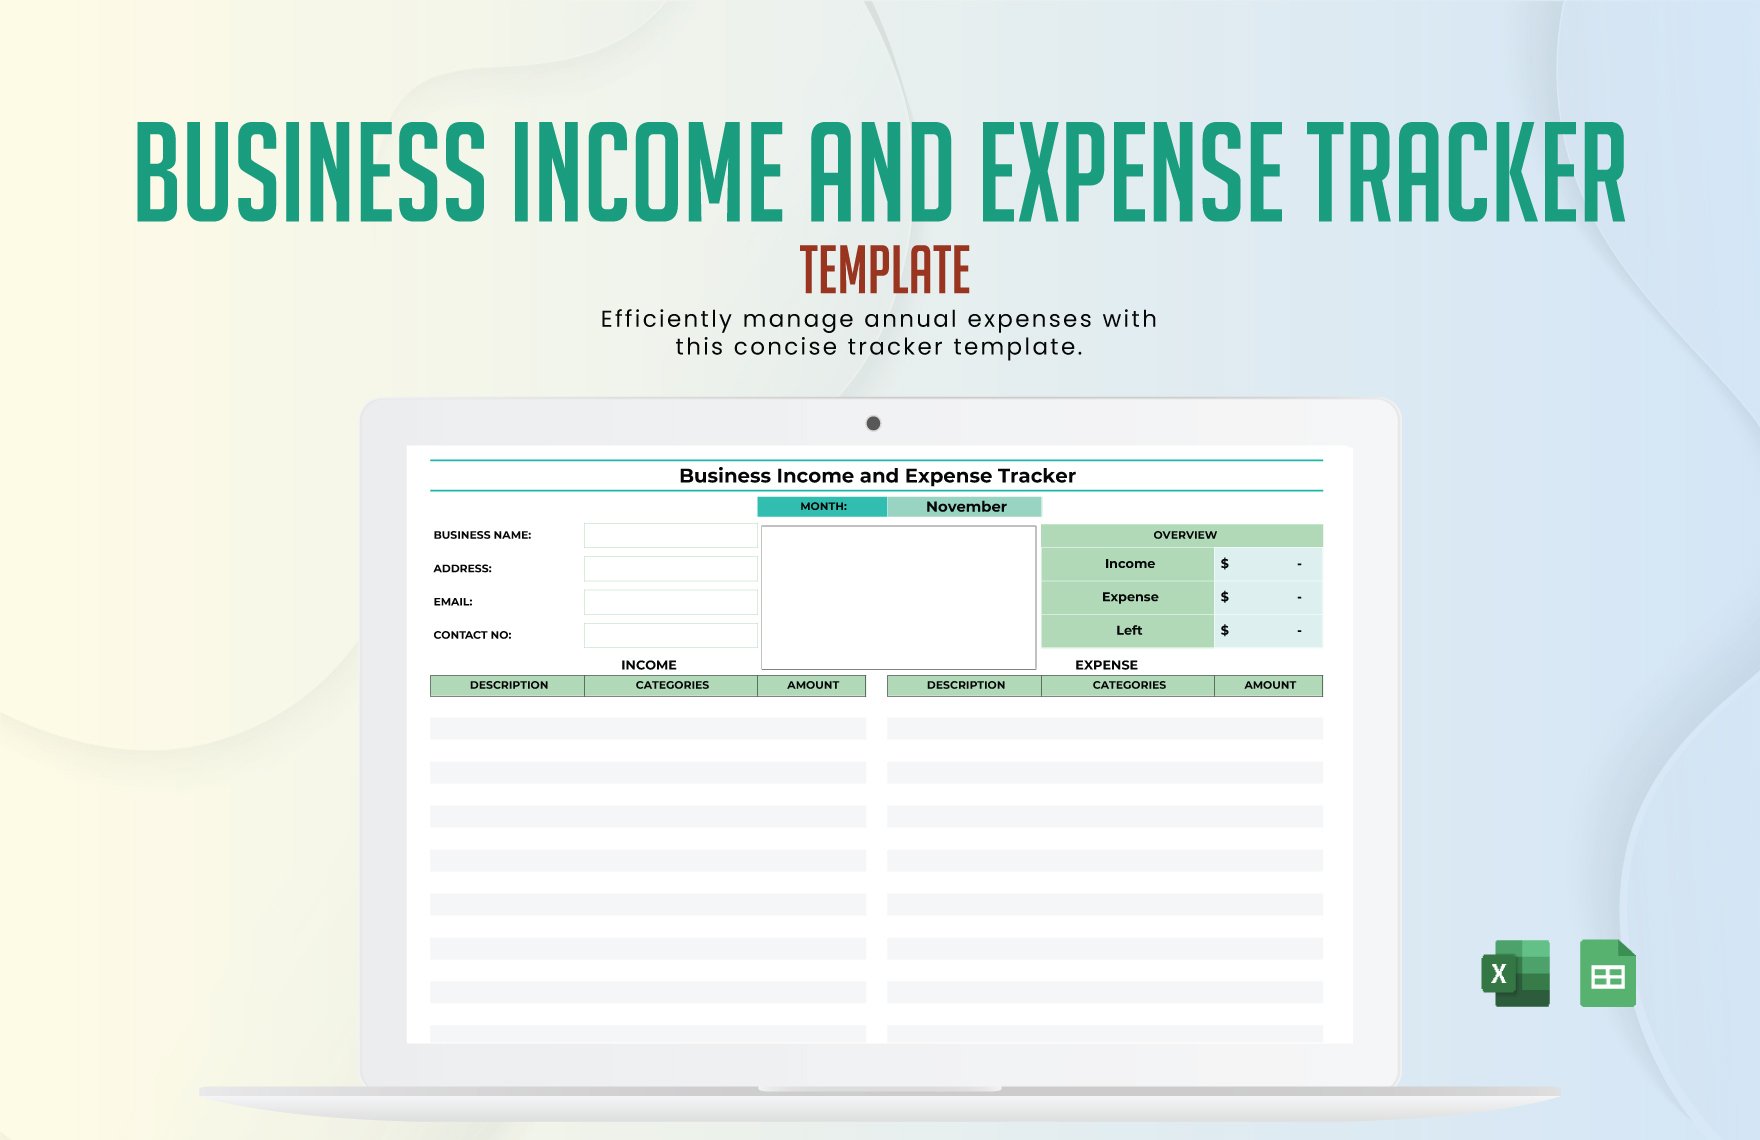 Business Income and Expense Tracker Template in Excel, Google Sheets